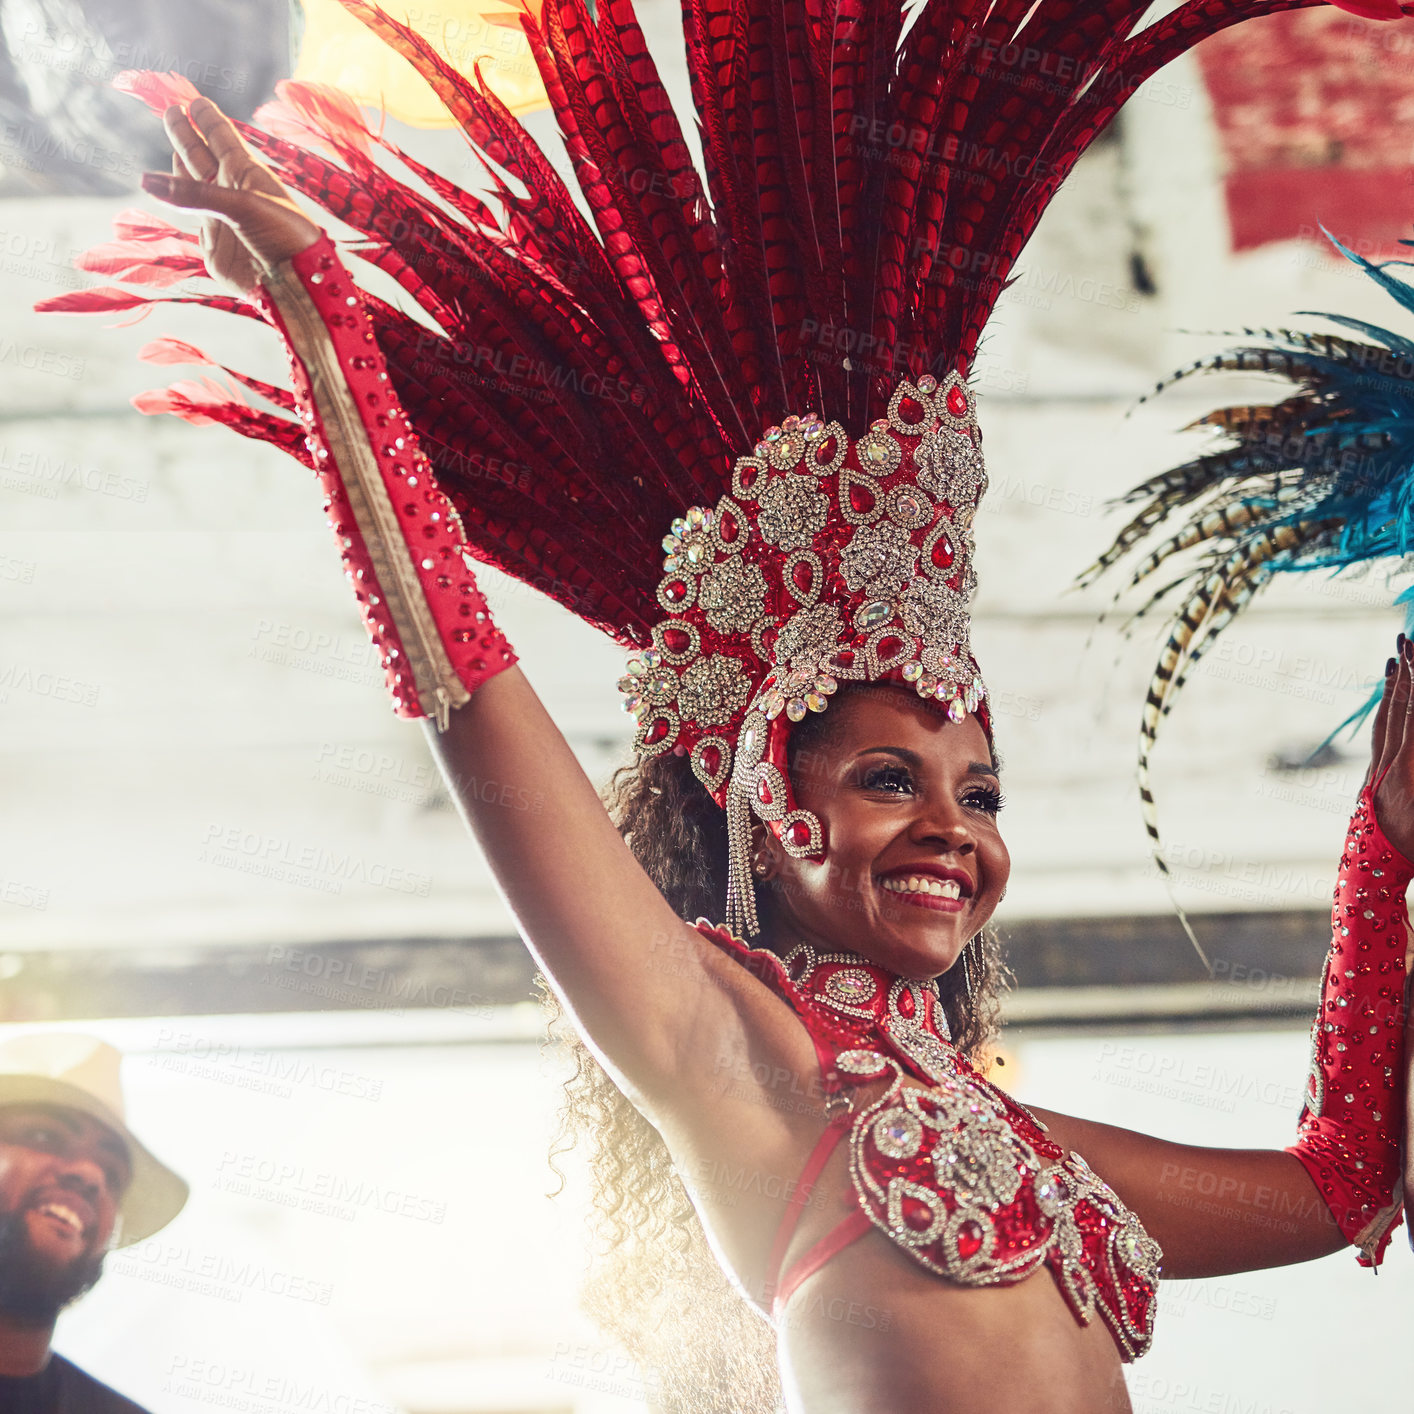 Buy stock photo Shot of a samba dancer performing in a carnival